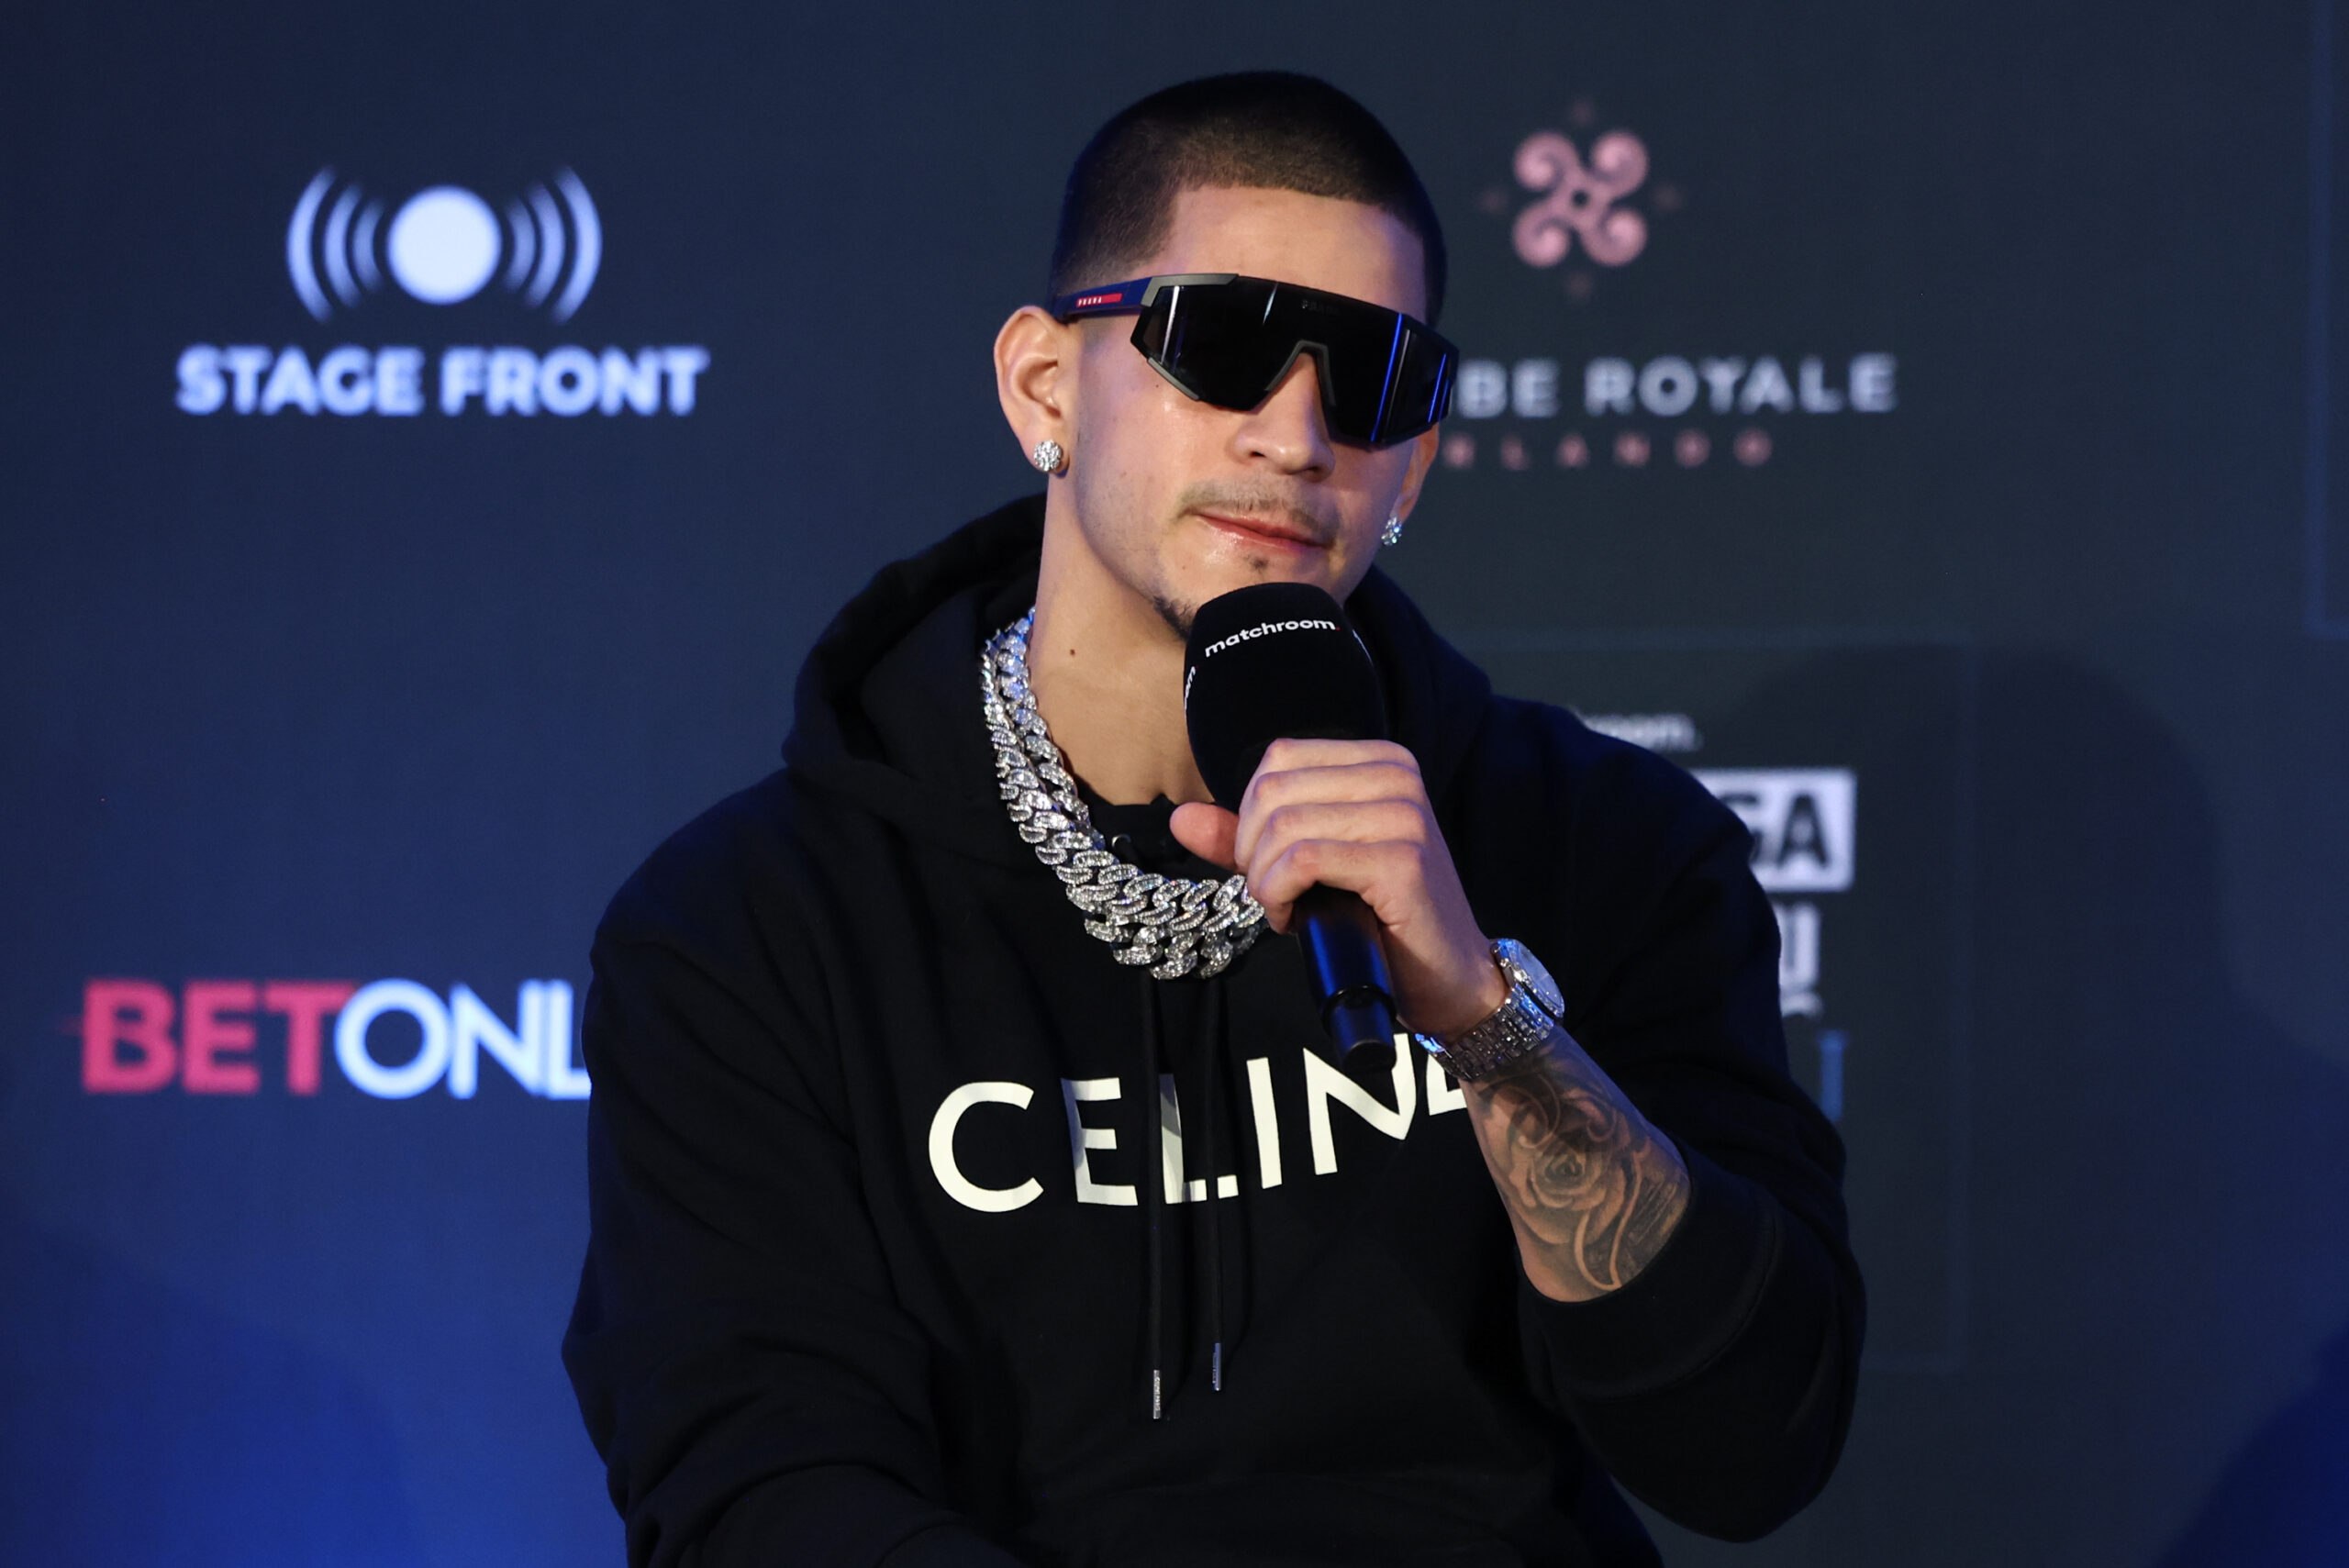 February 22, 2024; Orlando, FL; Edgar Berlanga speaks at the final press conference for his February 24, 2024 fight in Orlando, FL. (Foto: Ed Mulholland/Matchroom).